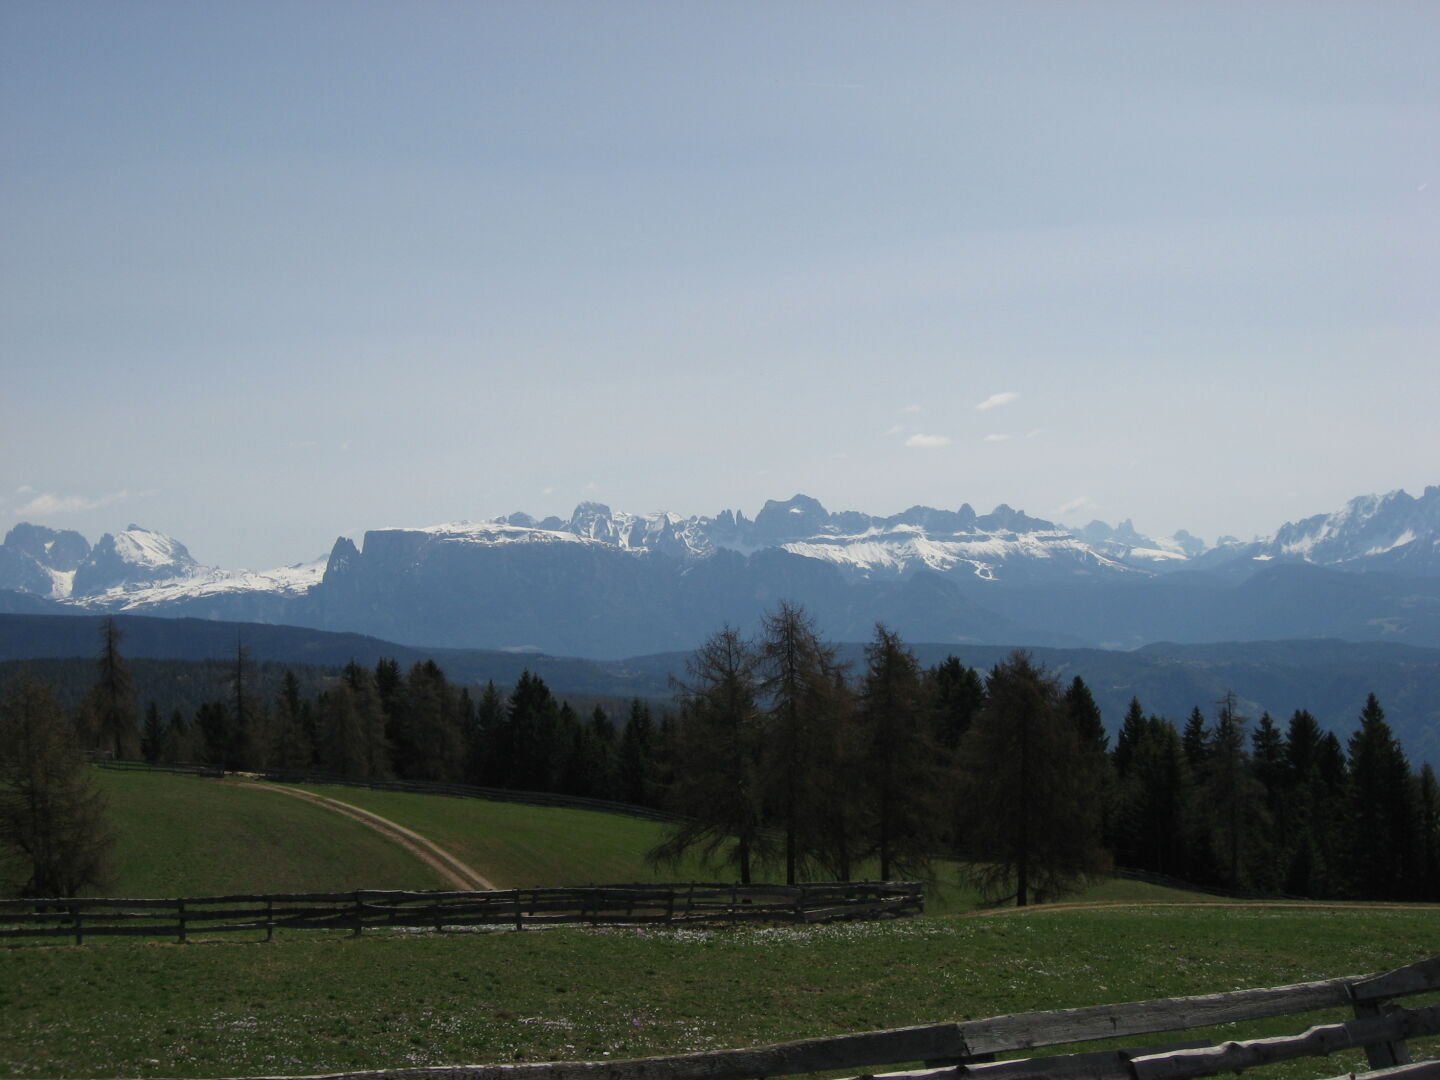 The wonderful clear weather allowed us to get a good look at the Dolomites.